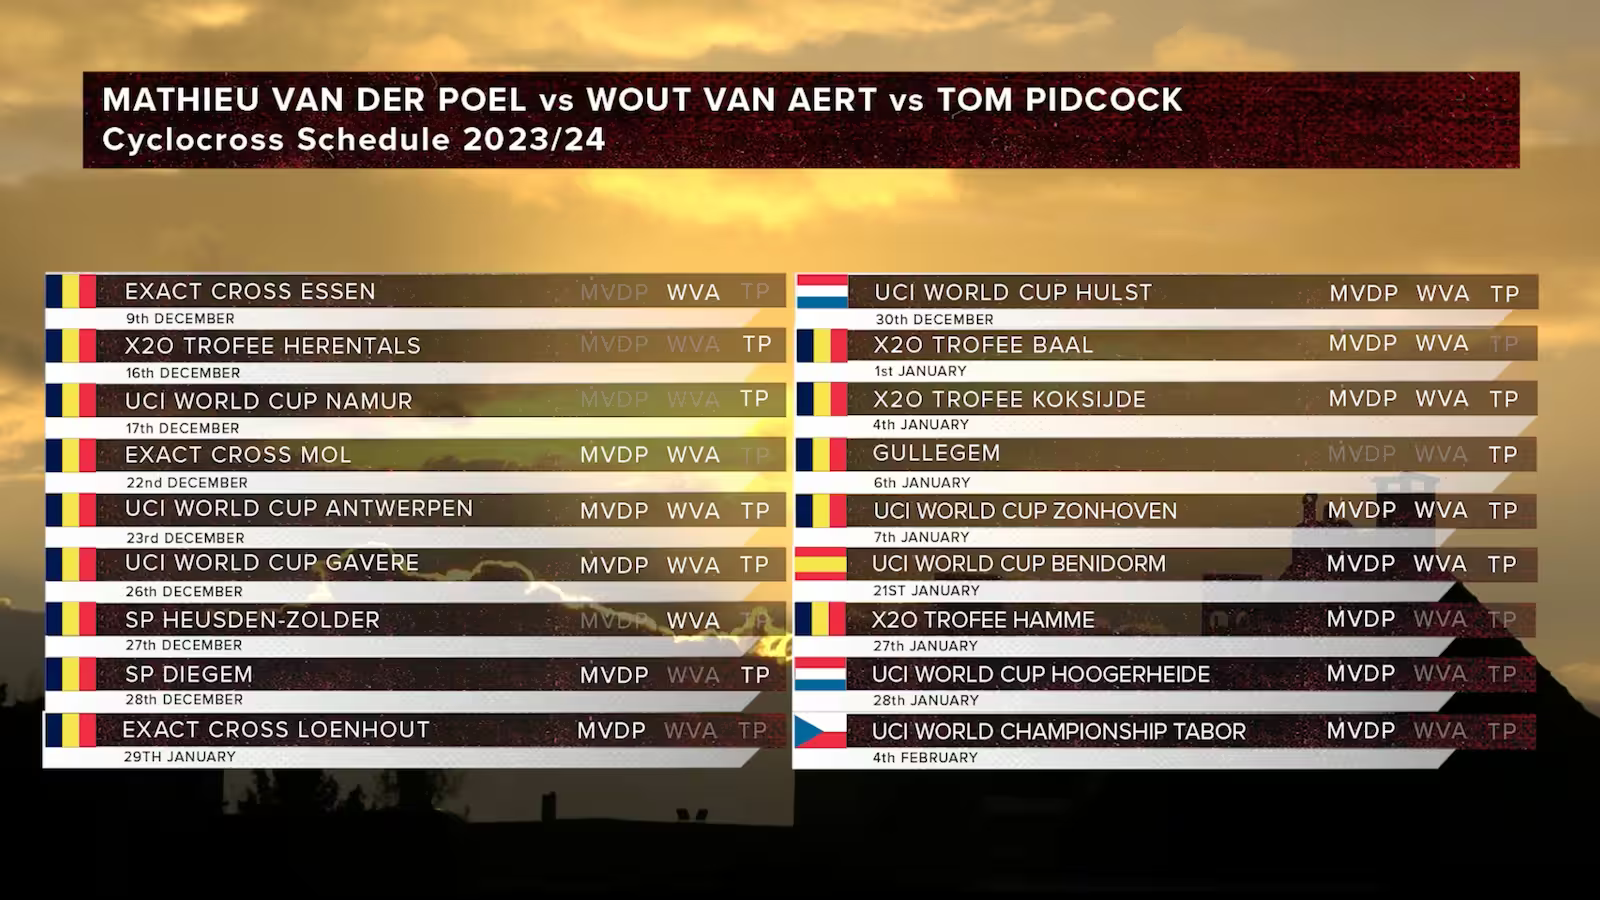 2023-24 calendar of cyclocross dates where Mathieu van der Poel, Tom Pidcock and Wout van Aert are participating